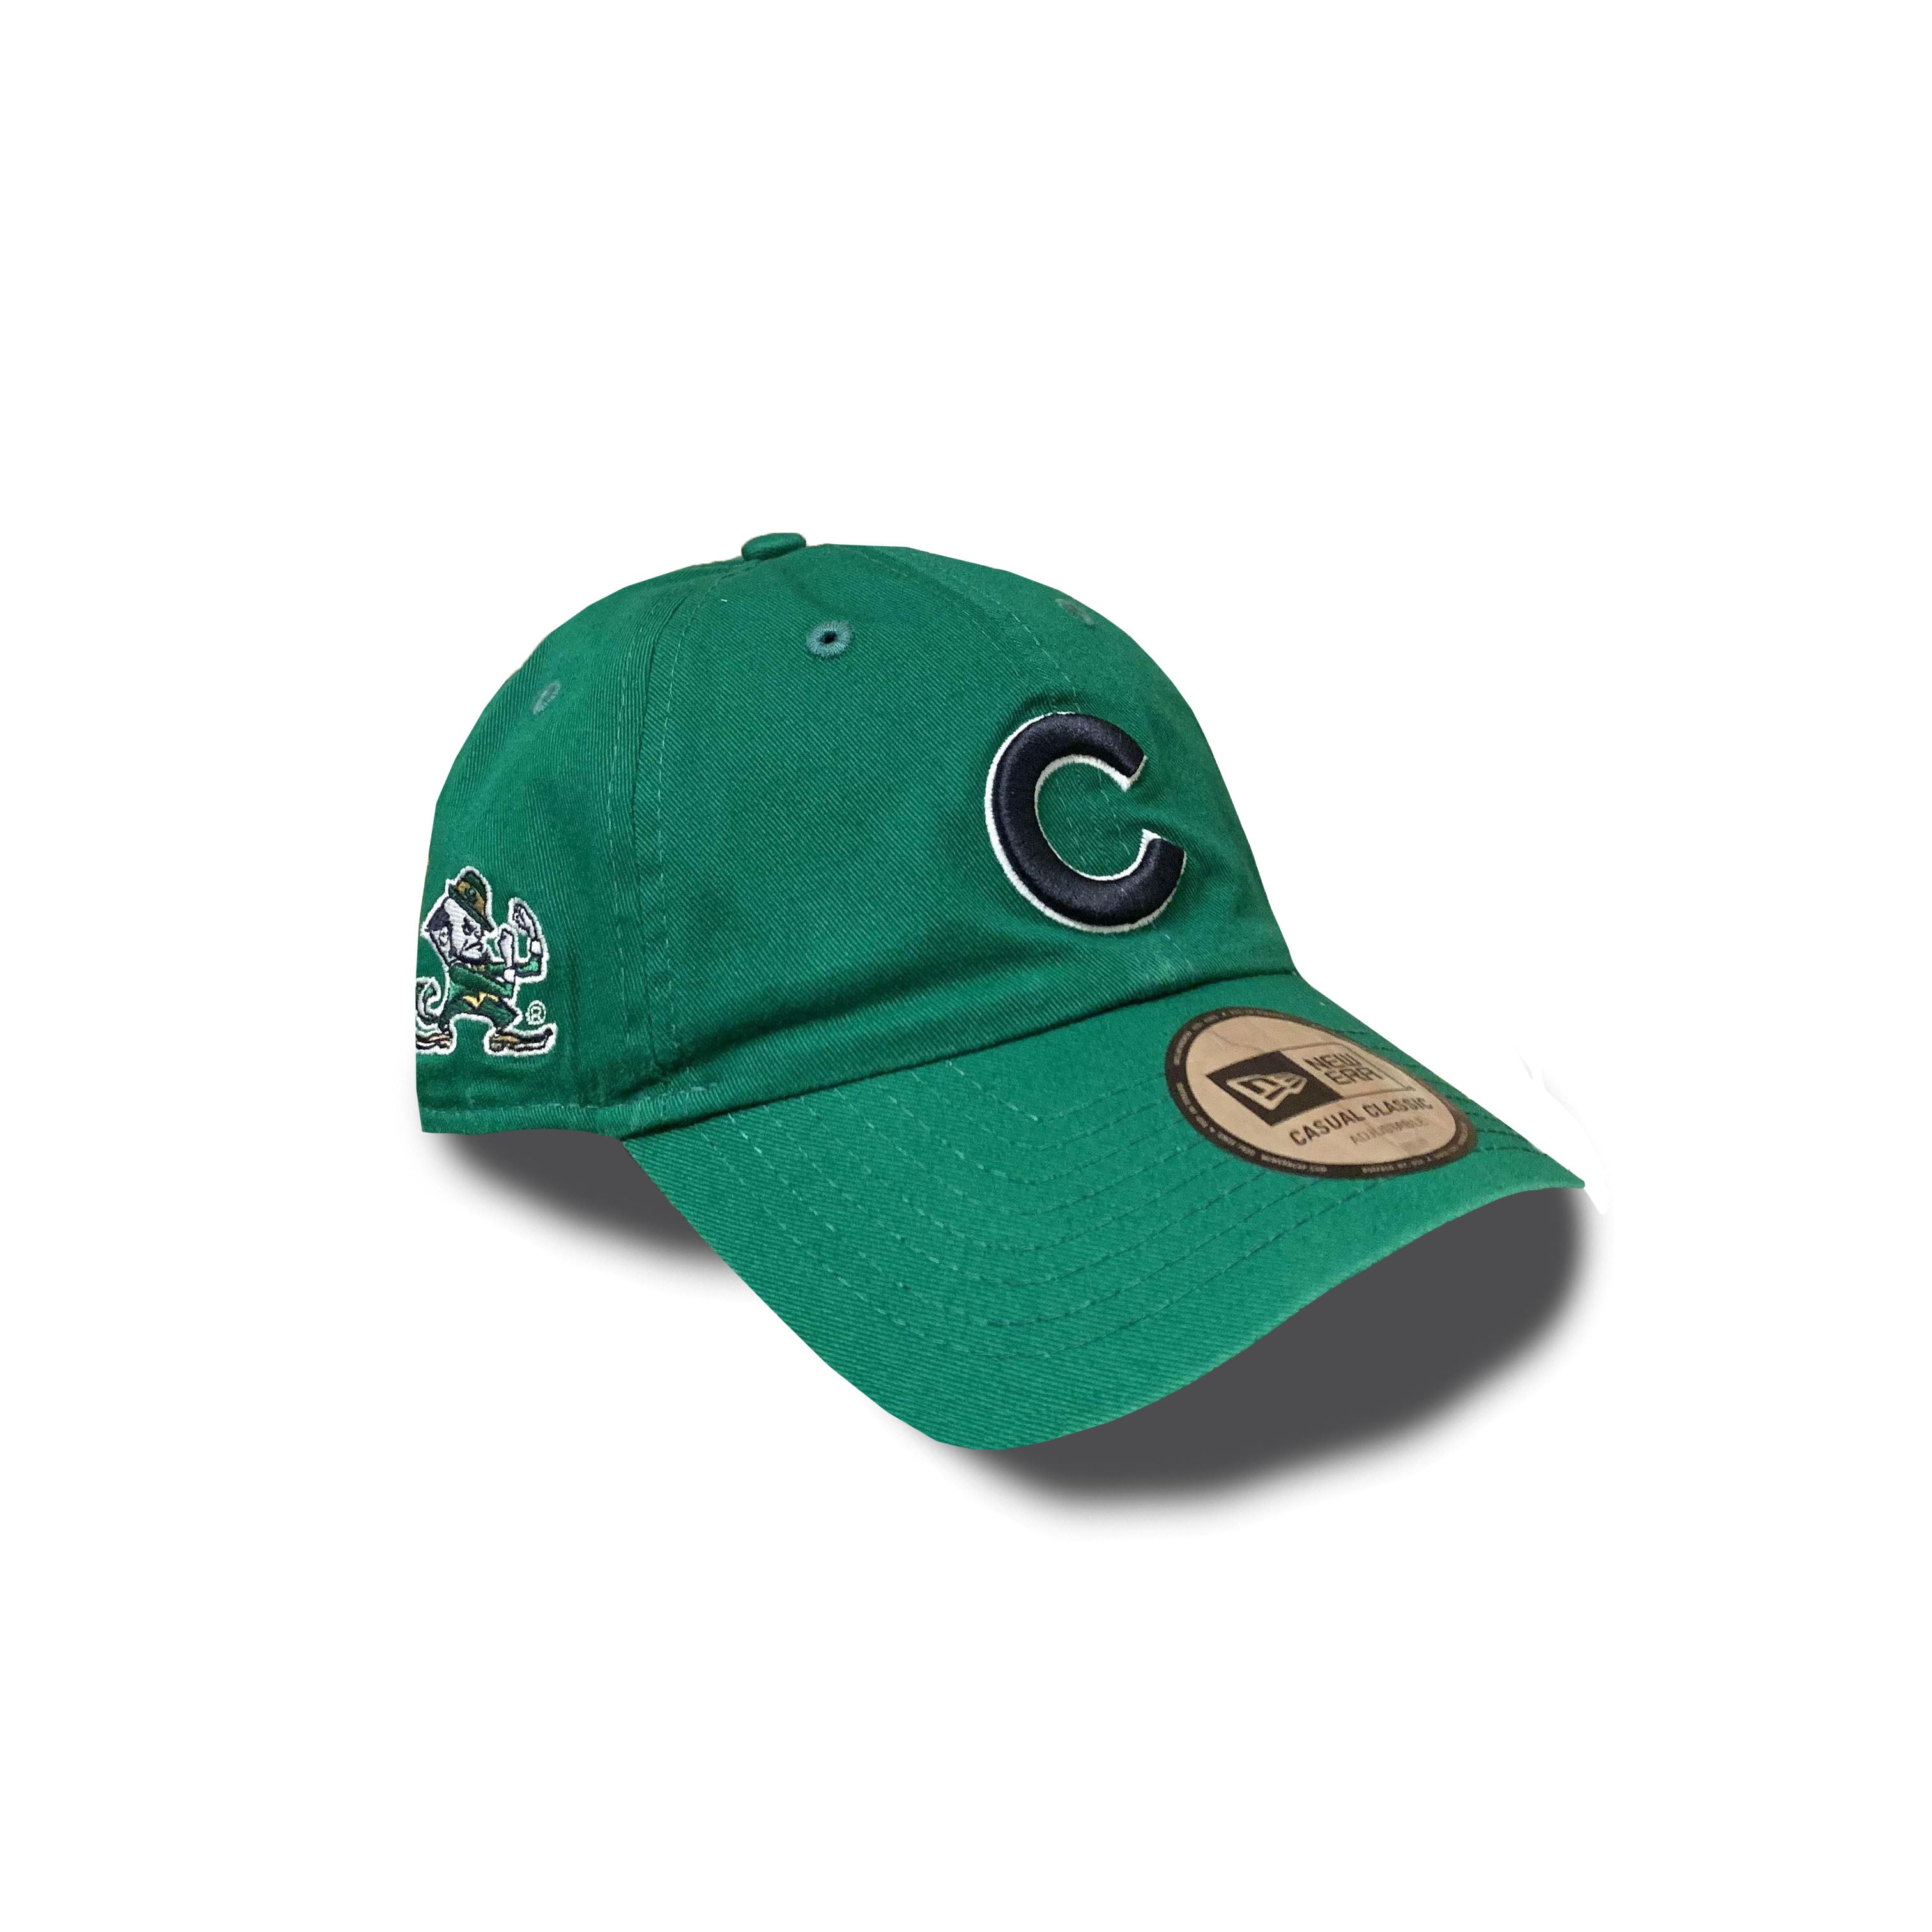 Chicago Cubs and University of Notre Dame New Era Green Adjustable Cap